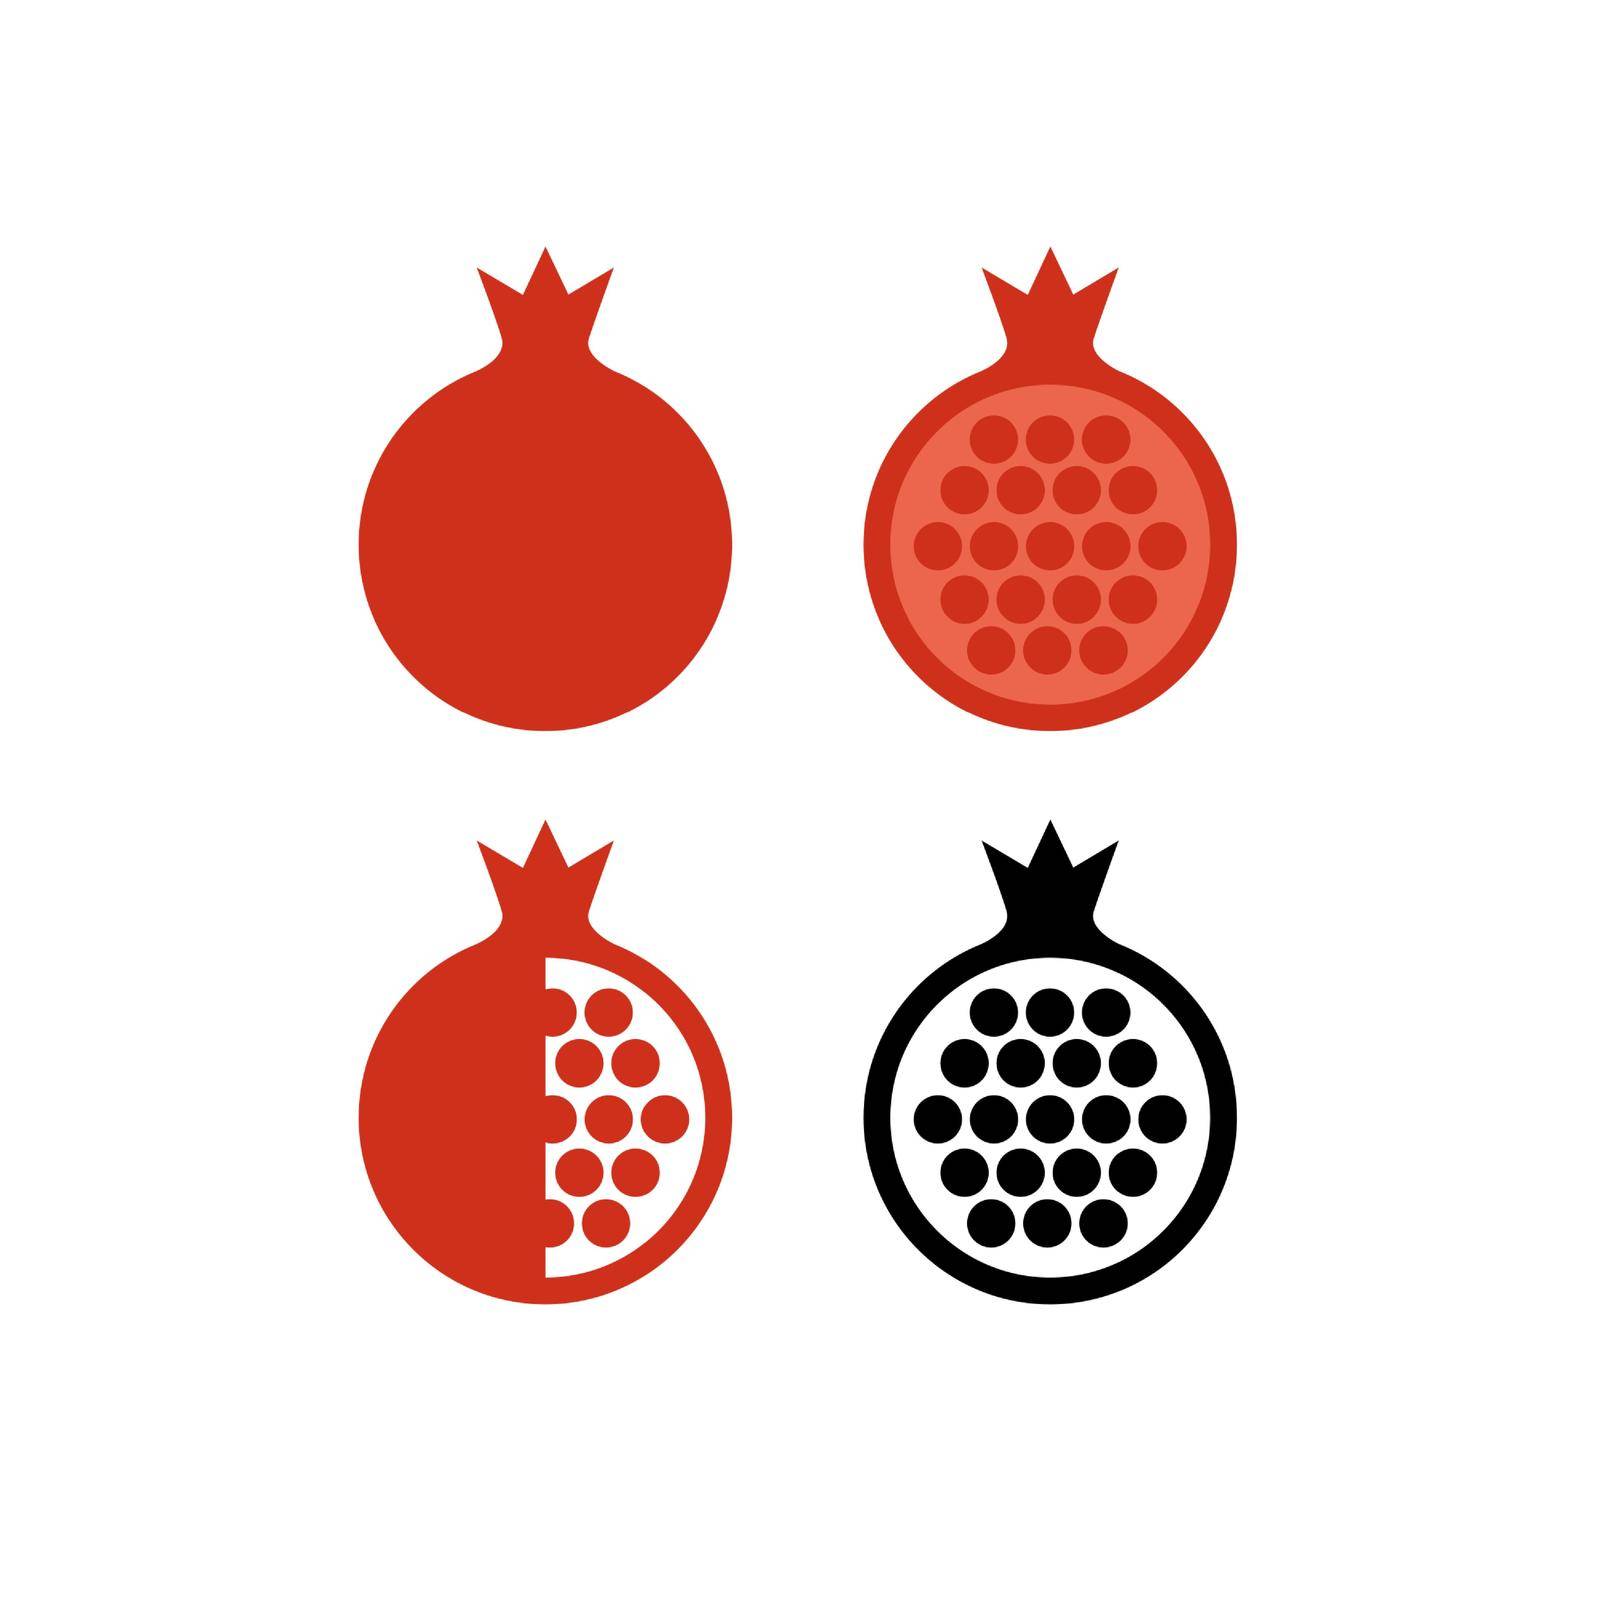 Pomegranate icons set. Whole fruit, half and without slice. Vector pictograms isolated on white.